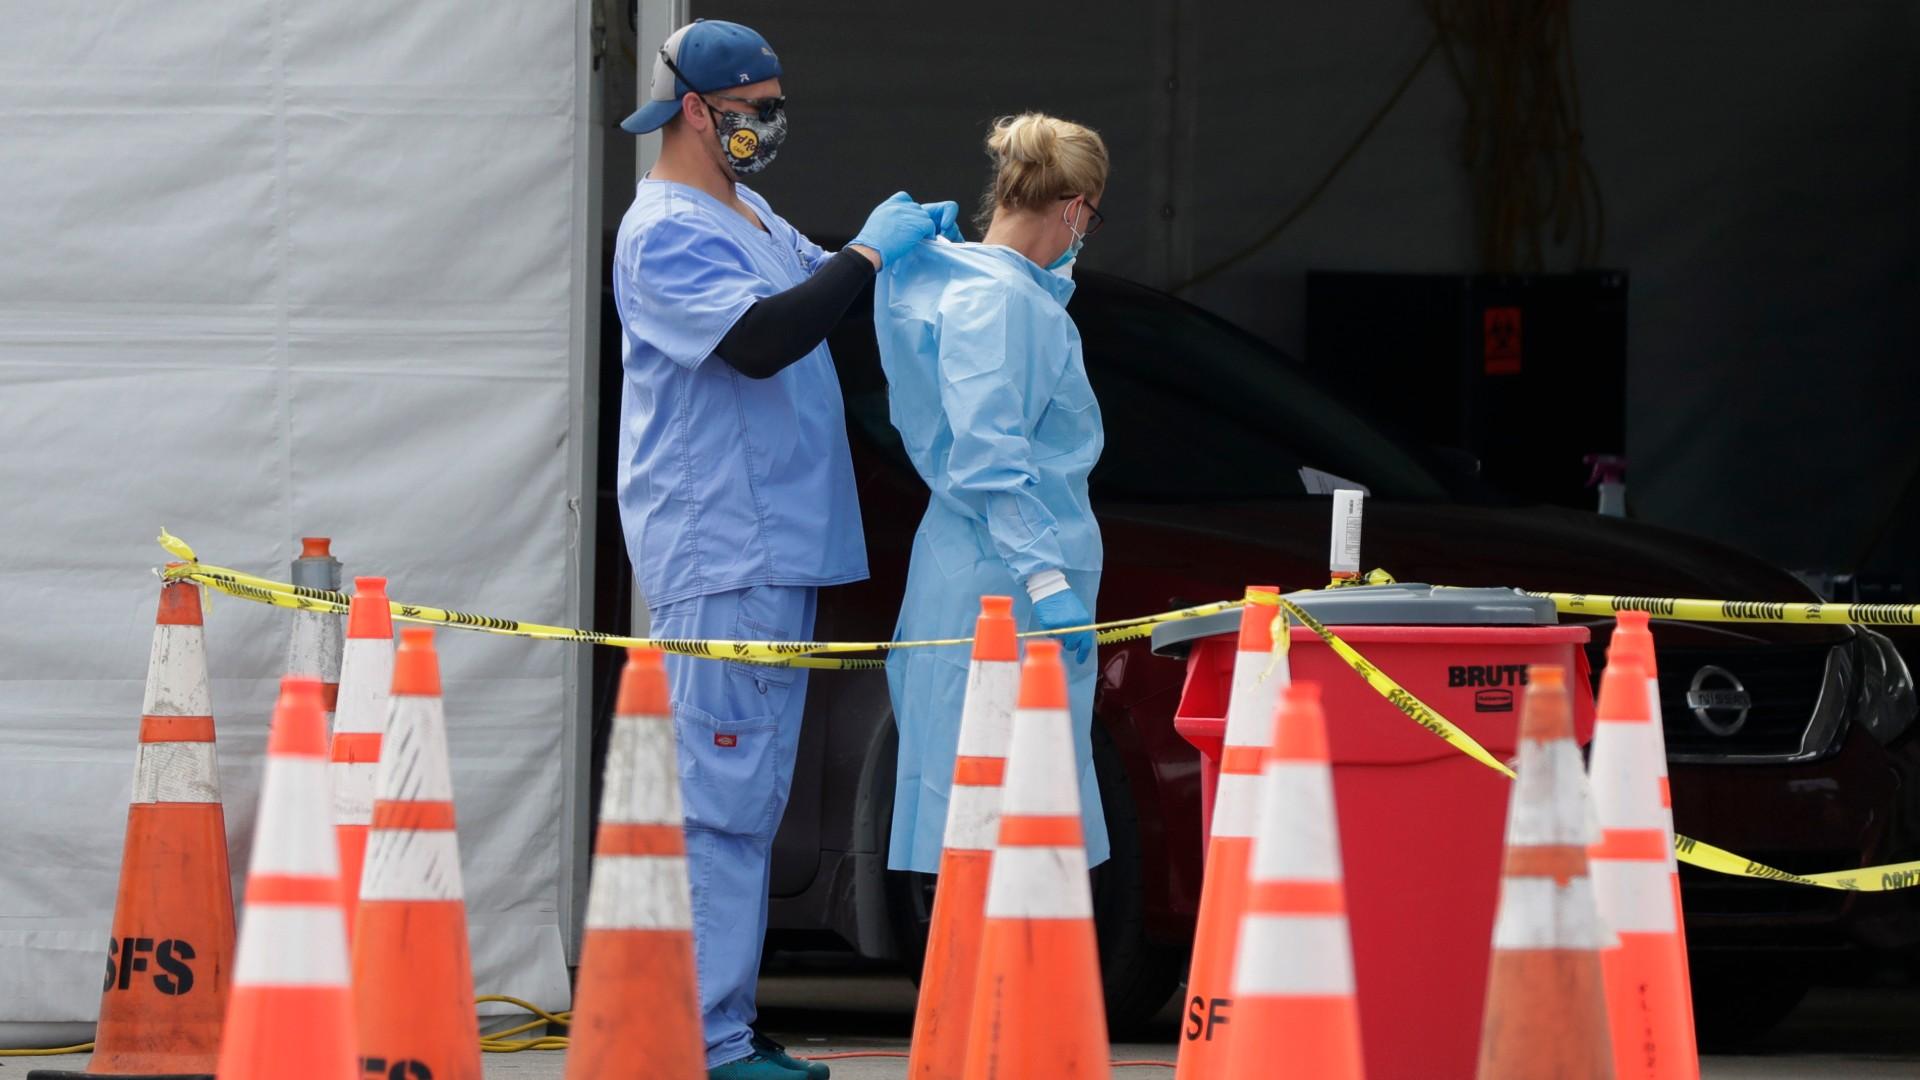 In this July 5, 2020, file photo, healthcare workers help each other with their personal protective equipment at a drive-thru coronavirus testing site outside Hard Rock Stadium in Miami Gardens, Fla. (AP Photo / Wilfredo Lee, File)